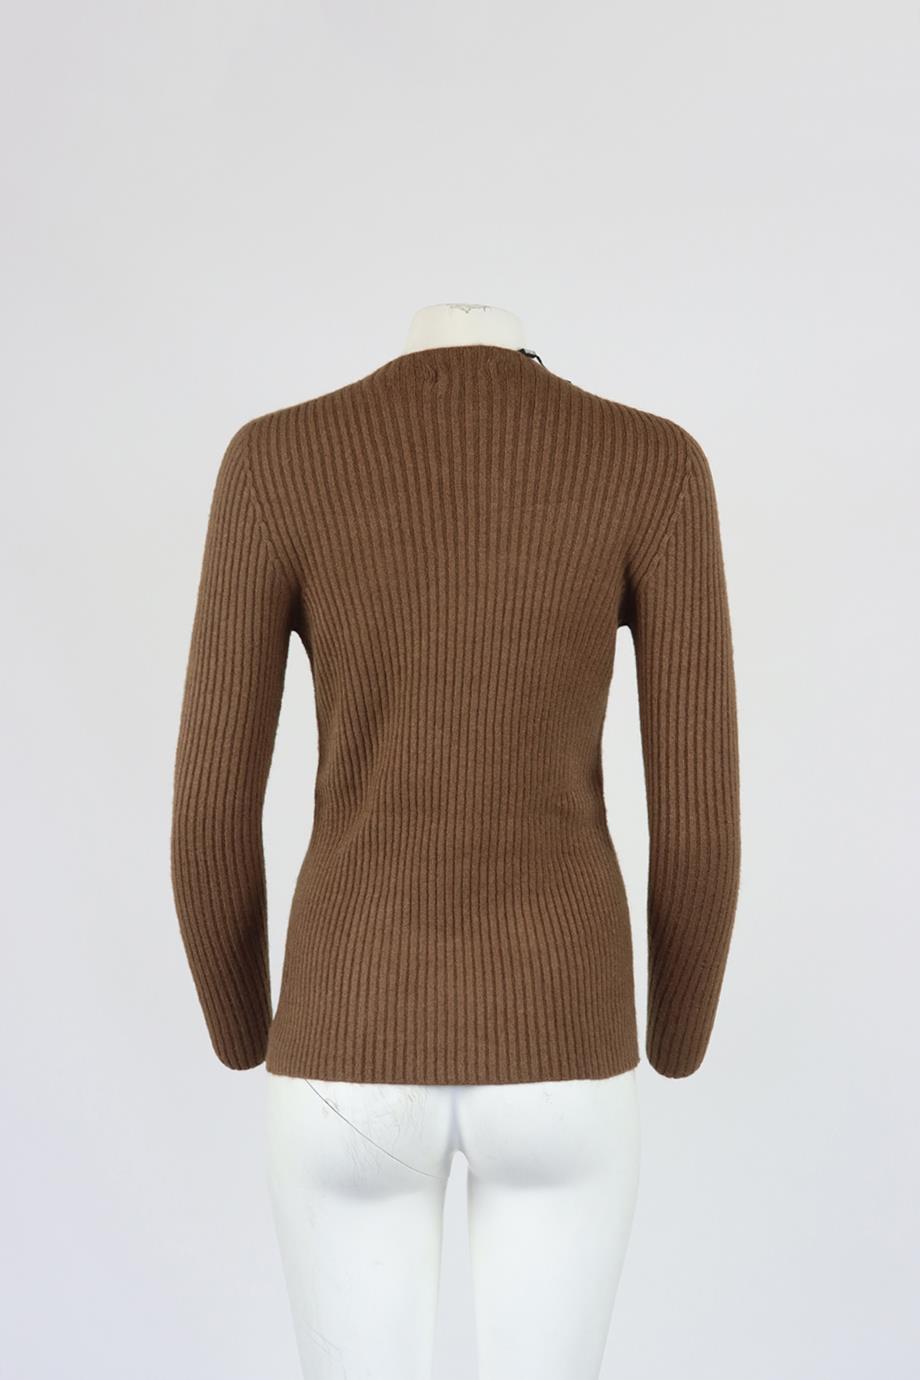 APPARIS RIBBED KNIT SWEATER XSMALL-SMALL